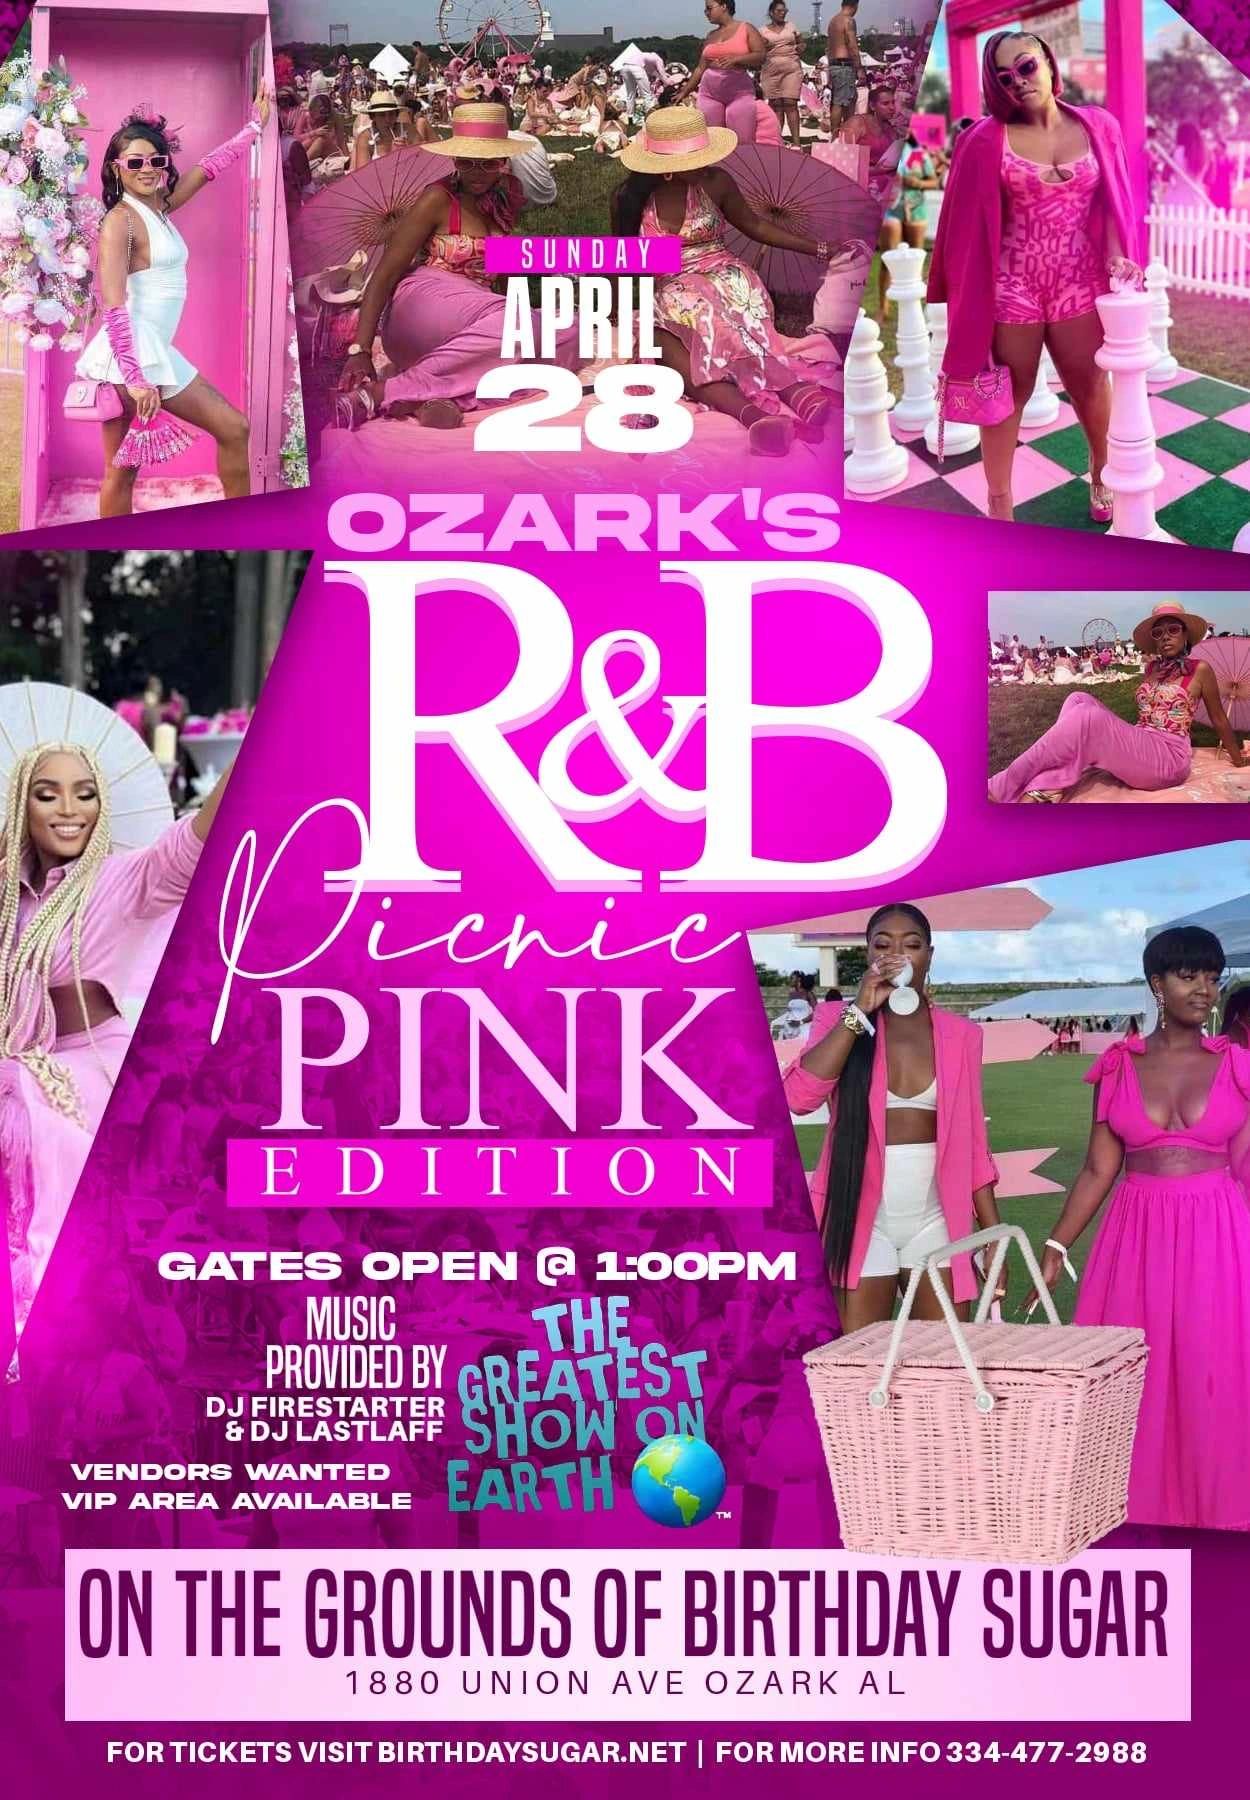 Ozark’s R&B Picnic: PINK EDITION 
Tickets on sale now